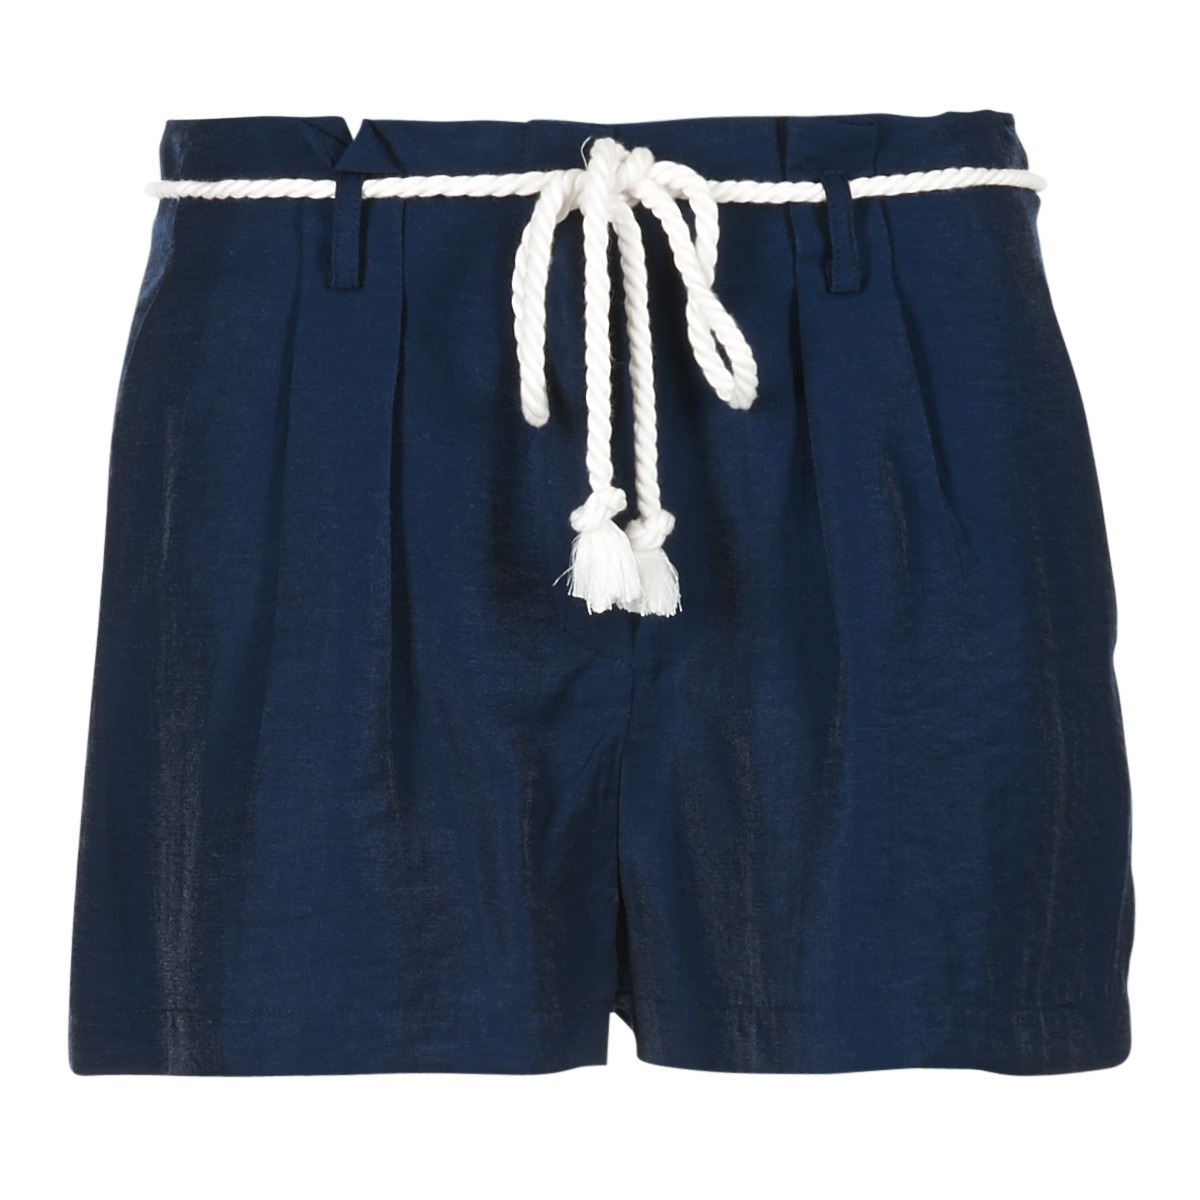 Casualtitude - Women's Blue Shorts from Spartoo GOOFASH